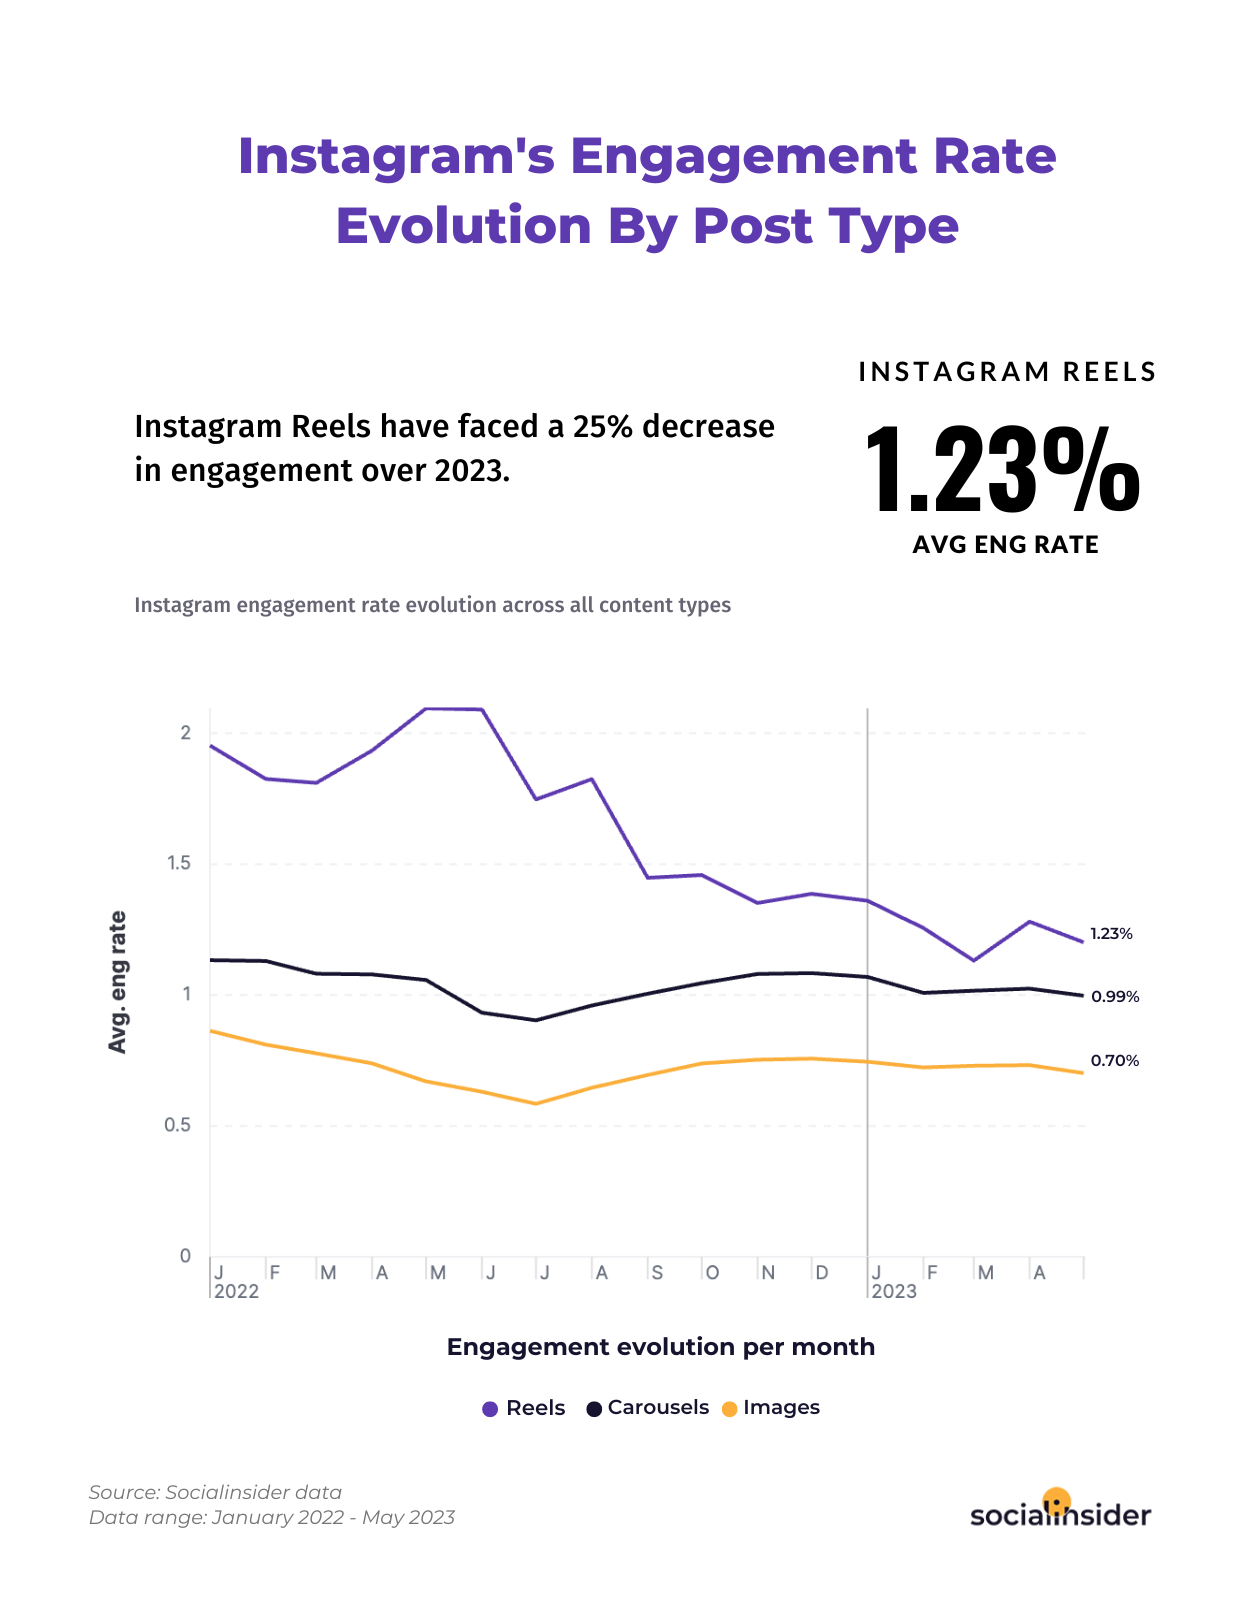 Here you can see the engagement rate evolution for different Instagram content types over 2022 and 2023.